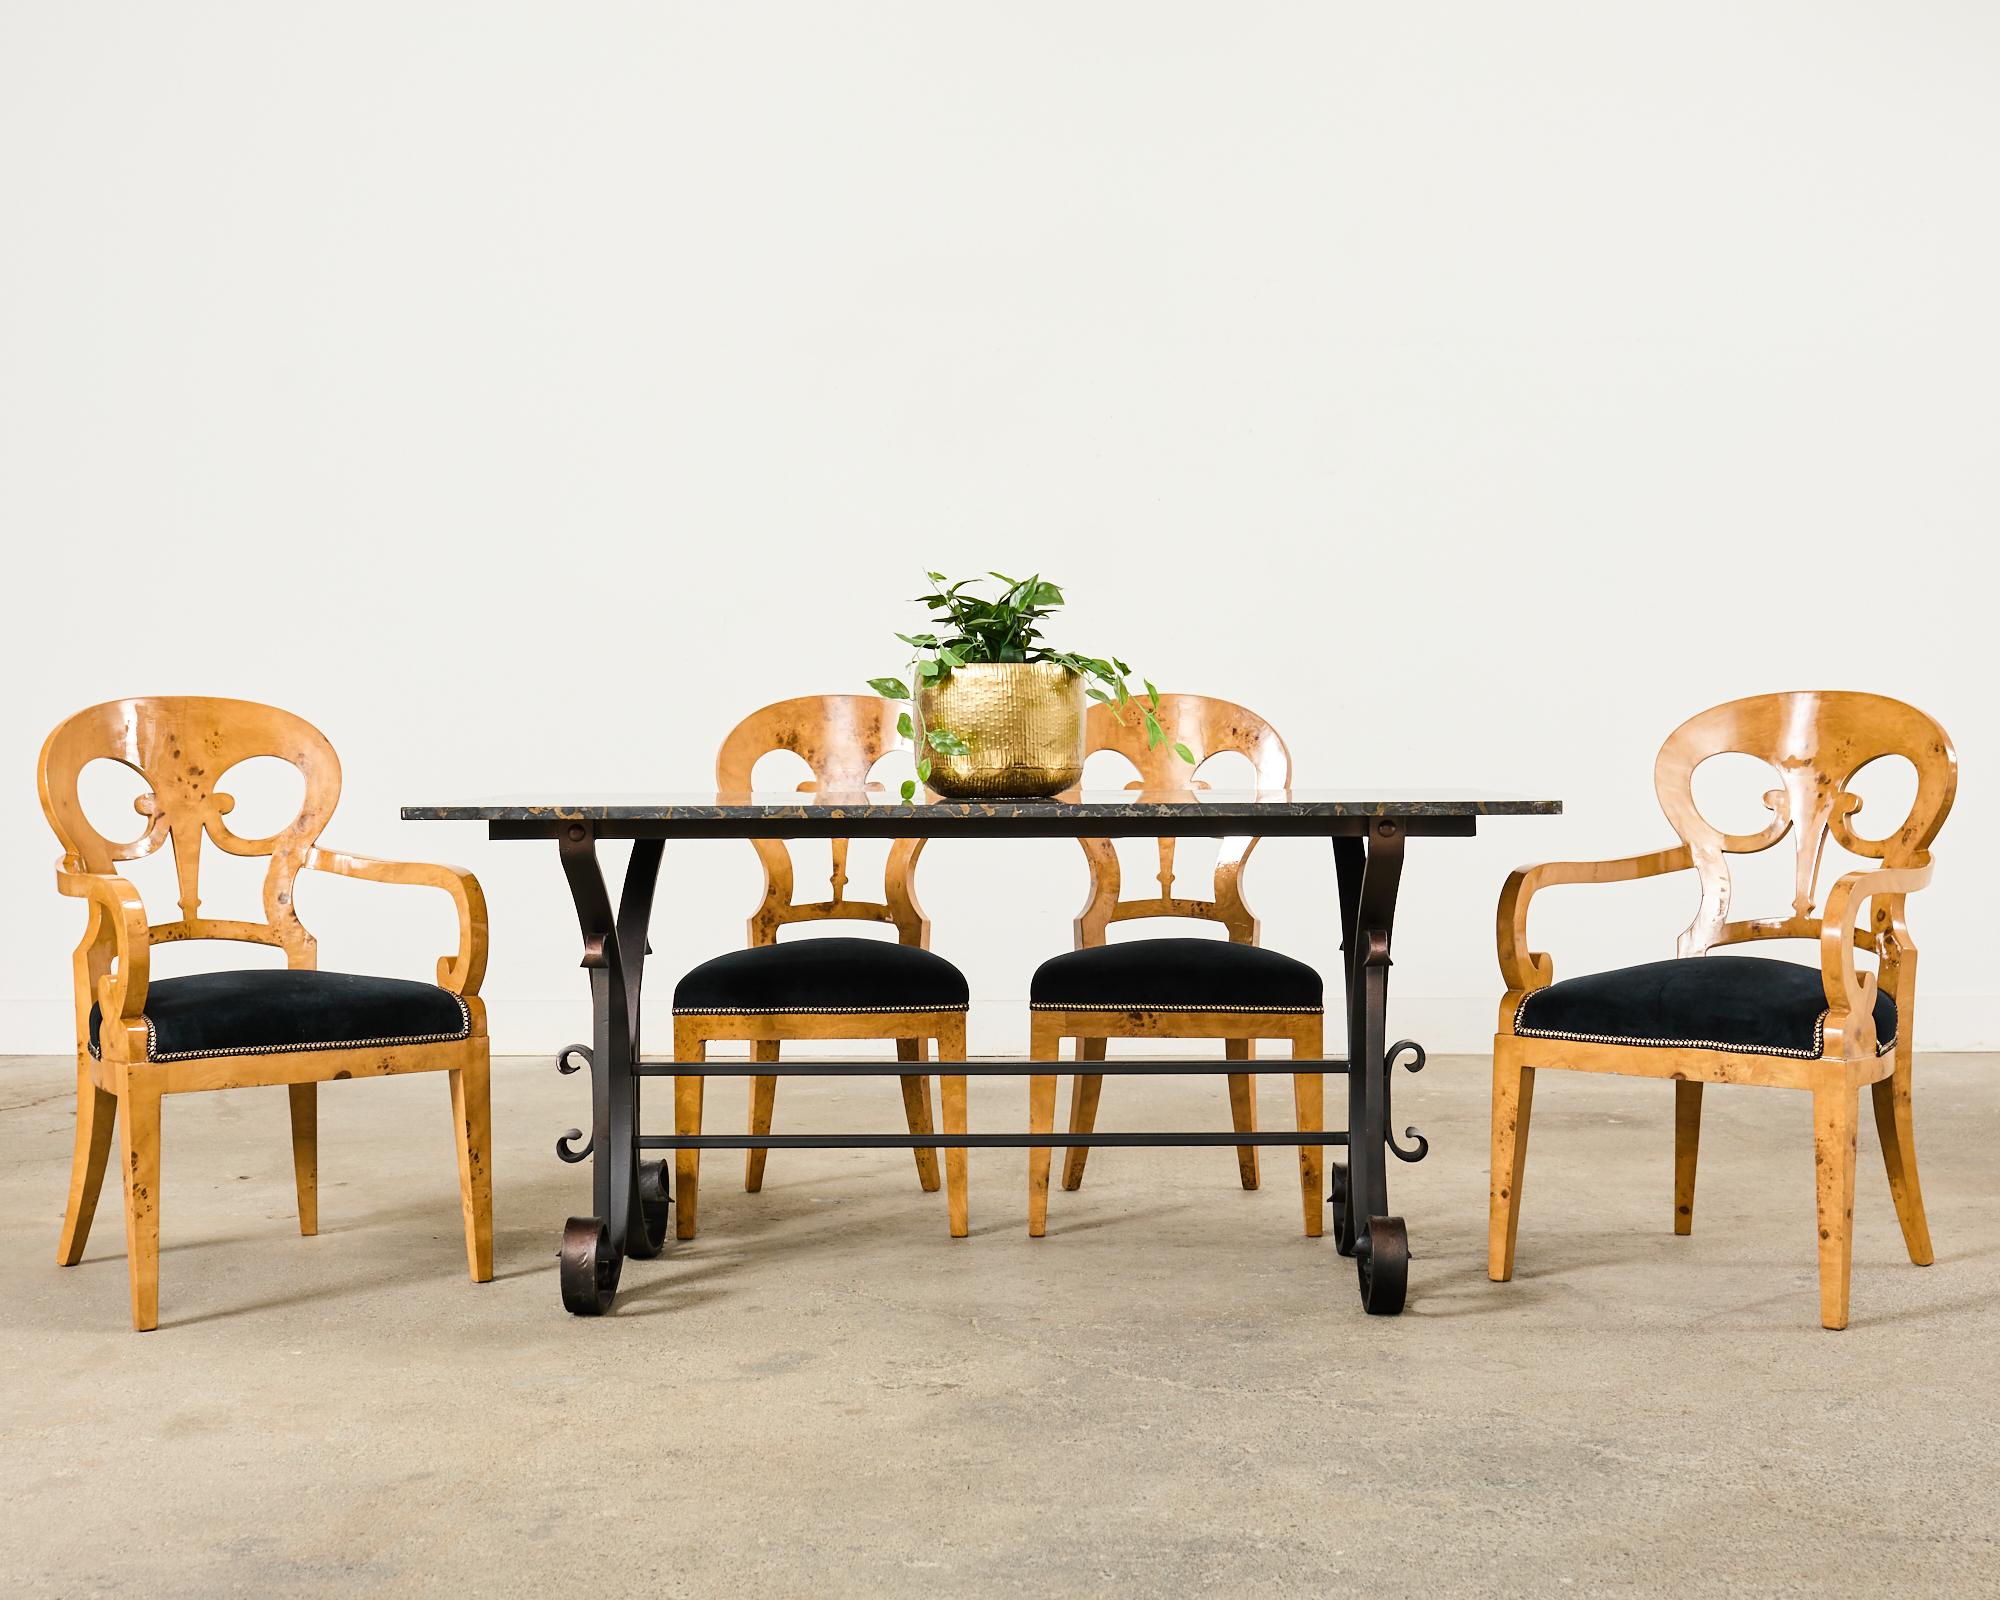 Dramatic set of twelve burl maple root veneer dining chairs made in the Viennese Biedermeier style. The set consists of ten side chairs and two host armchairs measuring 22 inches wide and 22 inches deep. The chairs feature beech wood frames crafted